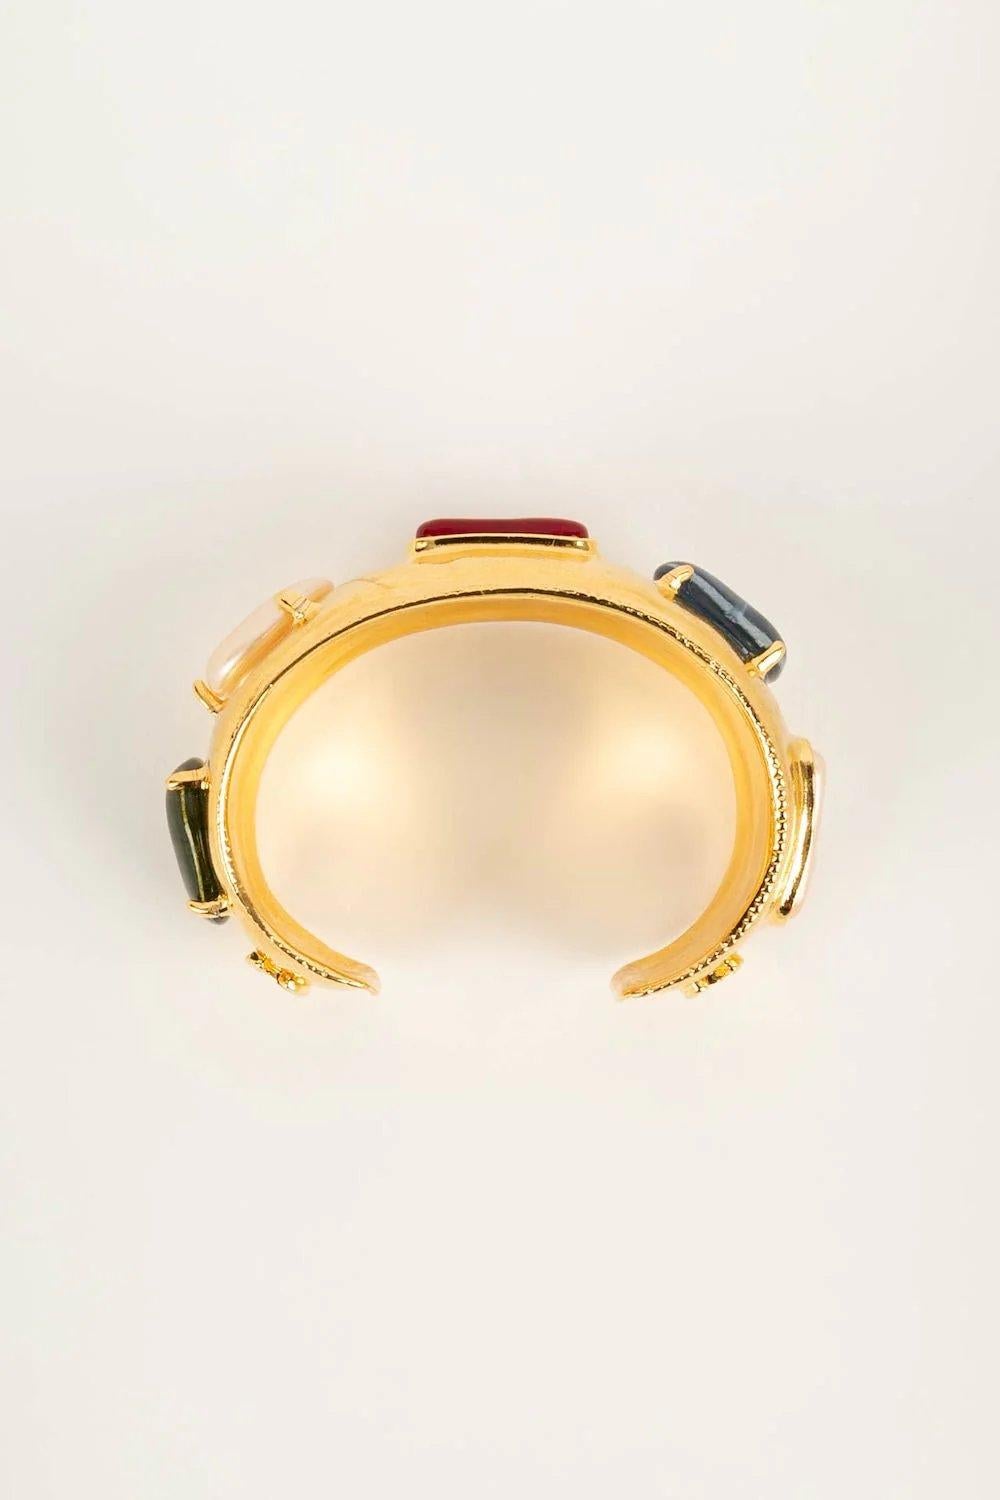 Chanel Cuff in Gilded Metal and Black Glass Paste, 1997 For Sale 1